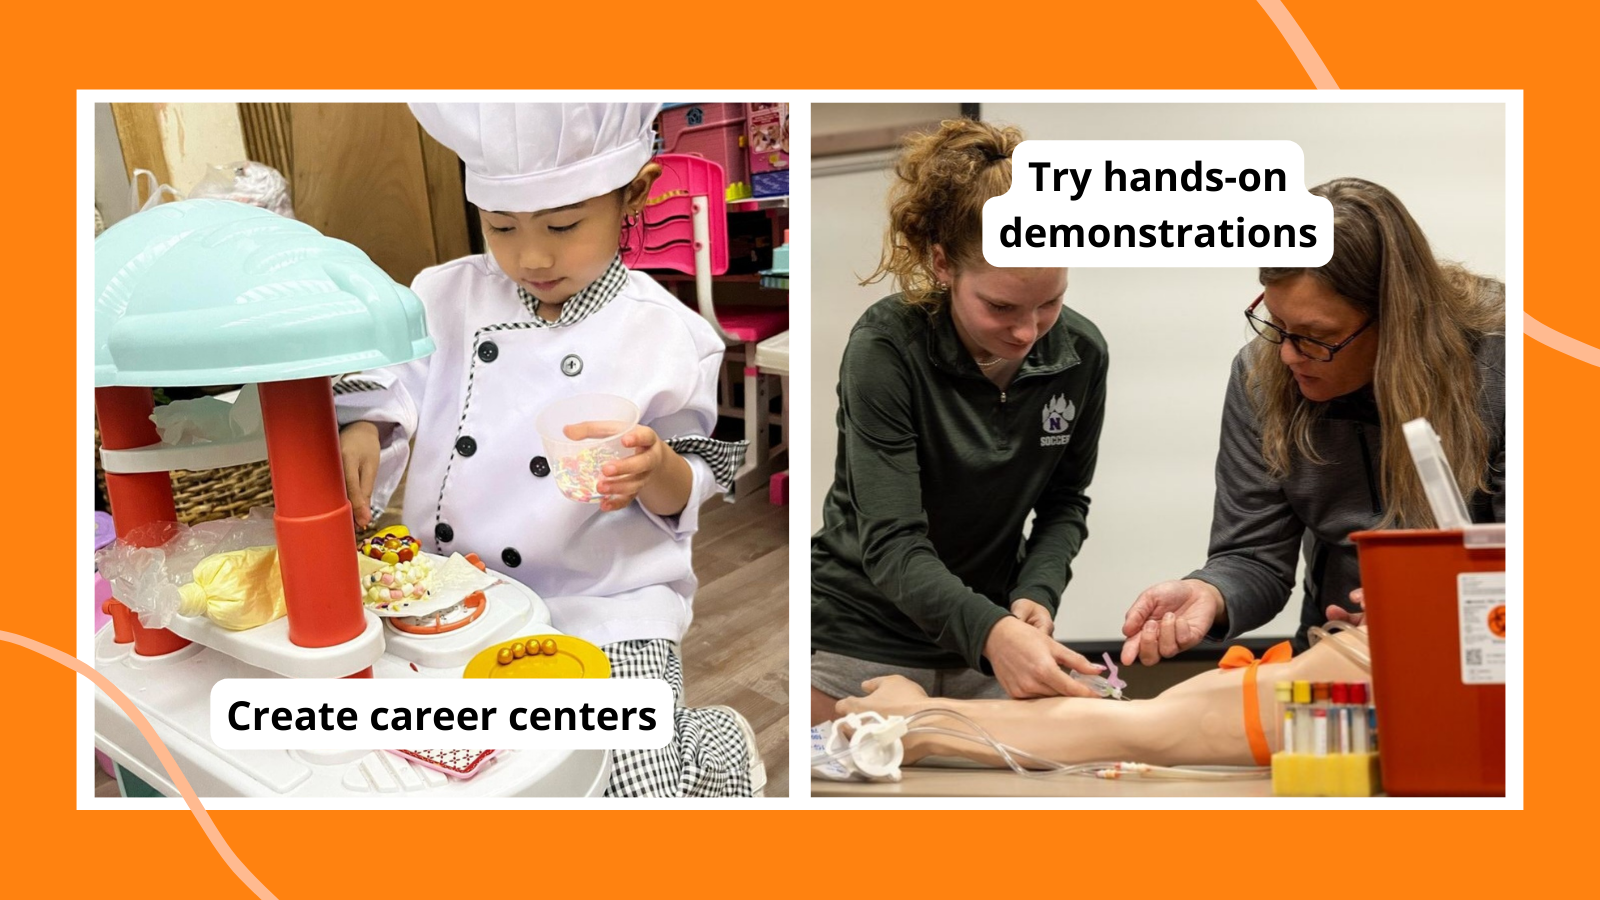 Collage of career day ideas, including career centers and hands-on demos